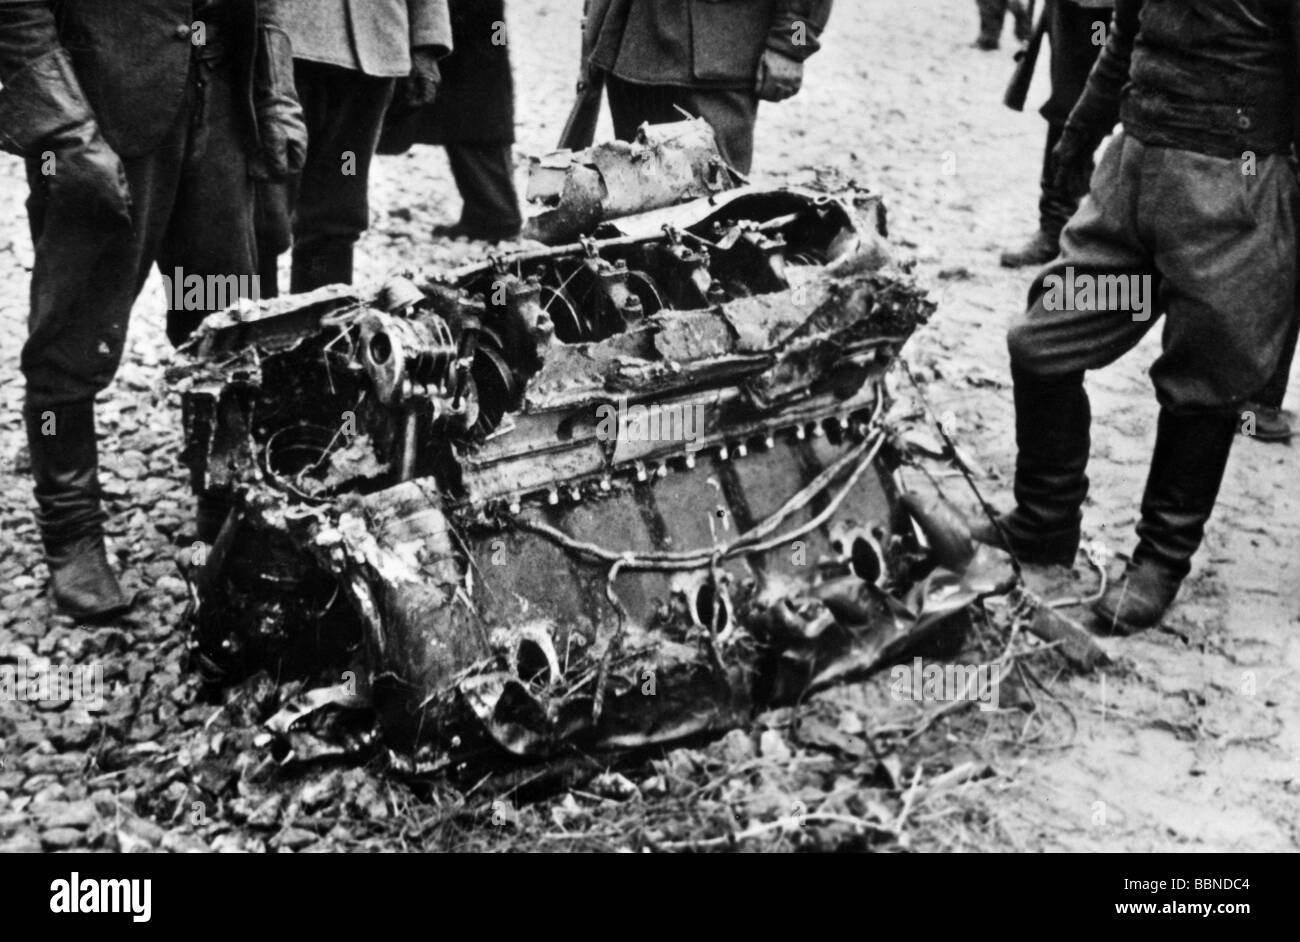 events, Second World War / WWII, Finland, engine of a shot down Soviet bomber, engines, airplane, airplanes, aeroplane, aeroplanes, destroyed, bombers, USSR, Soviet Union, 20th century, historic, historical, Winter War 1939 - 1940, Continuation War 1941 - 1944, aircraft, people, 1940s, Stock Photo